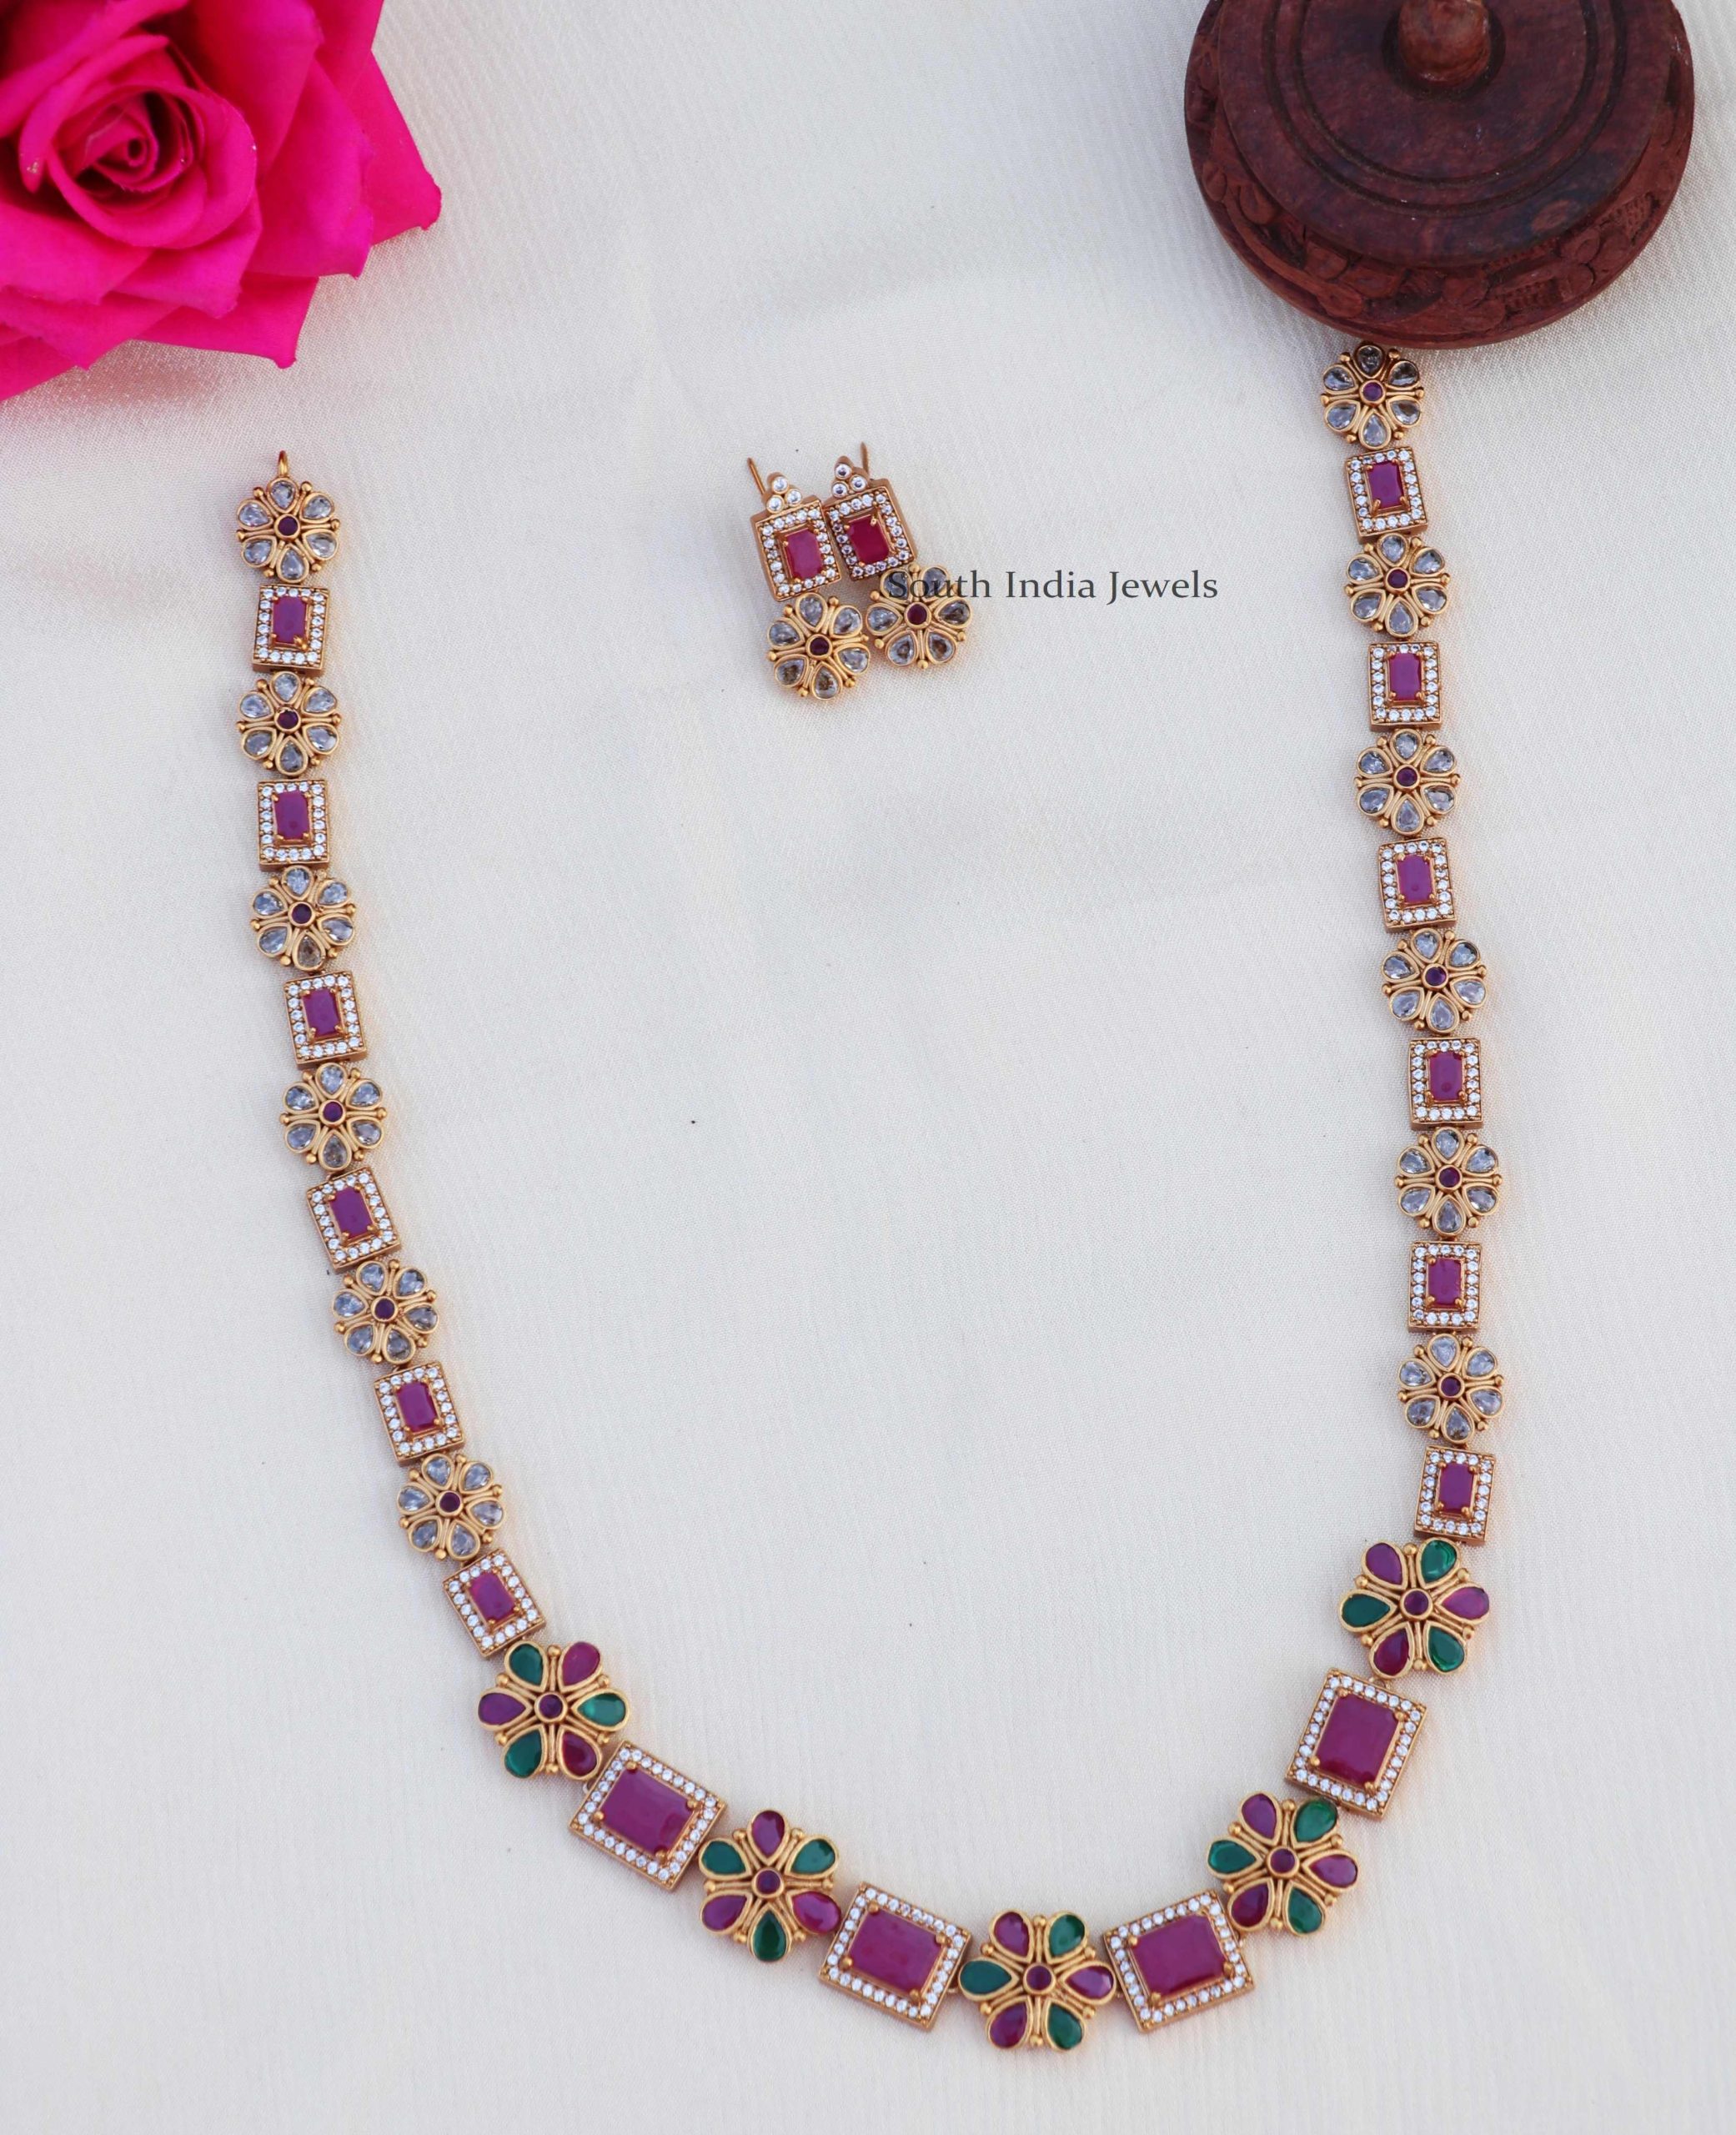 South Indian Long Necklace & Haram - [High Quality] - South India Jewels